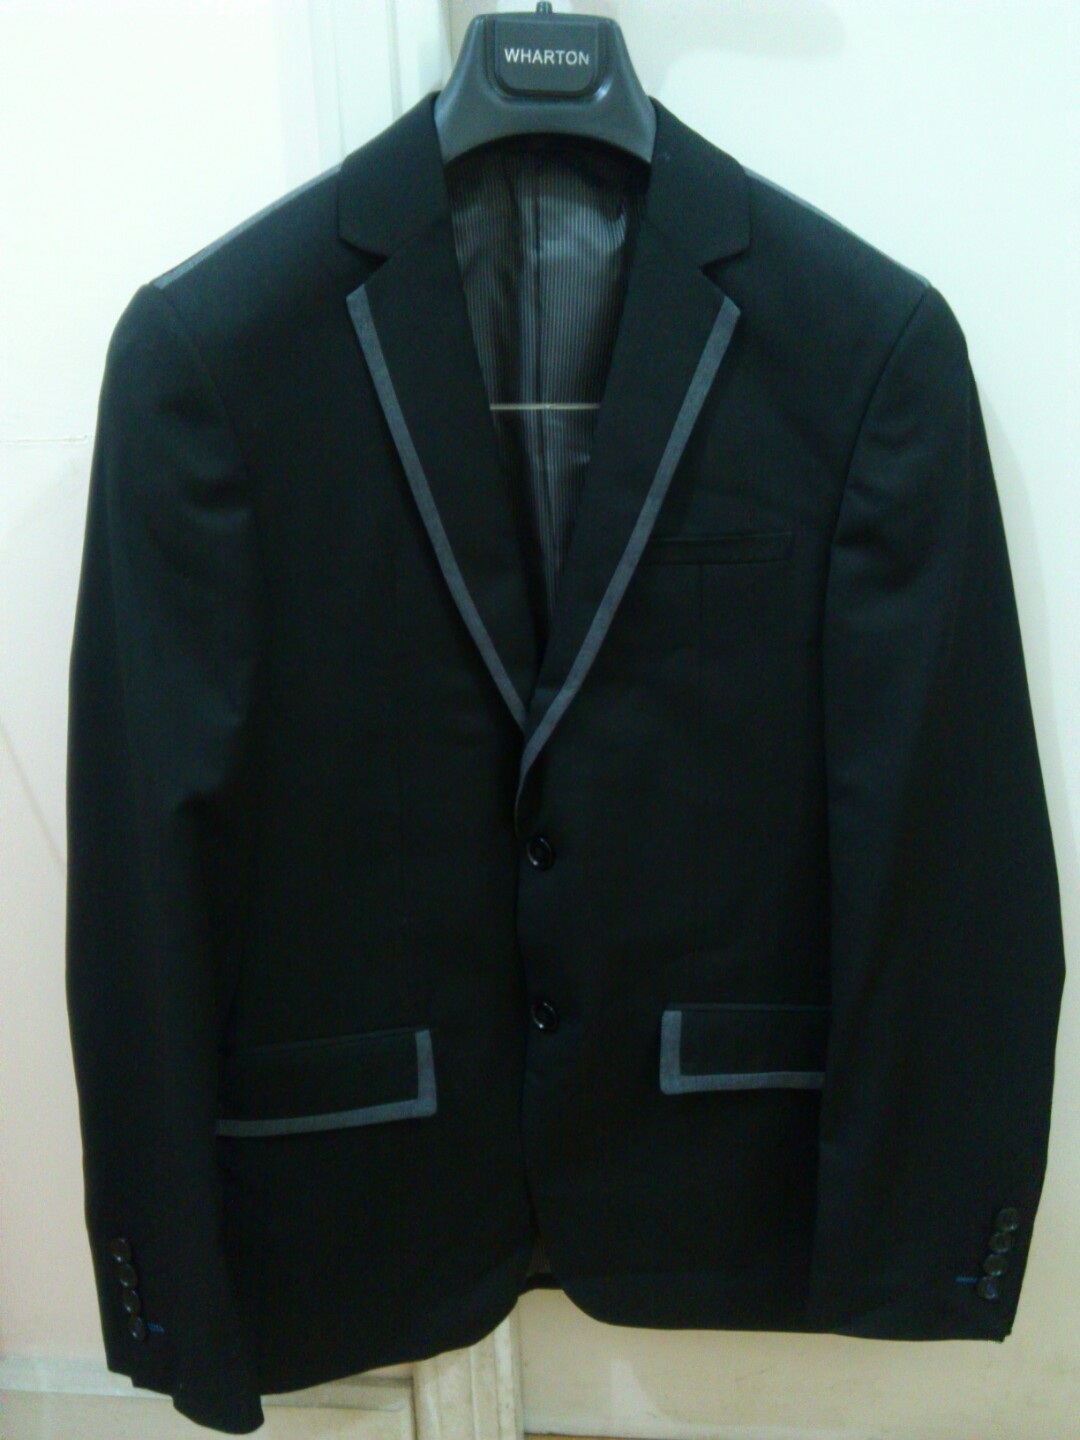 Black Suit Wharton by Rajo, Men's Fashion, Coats, Jackets and Outerwear ...